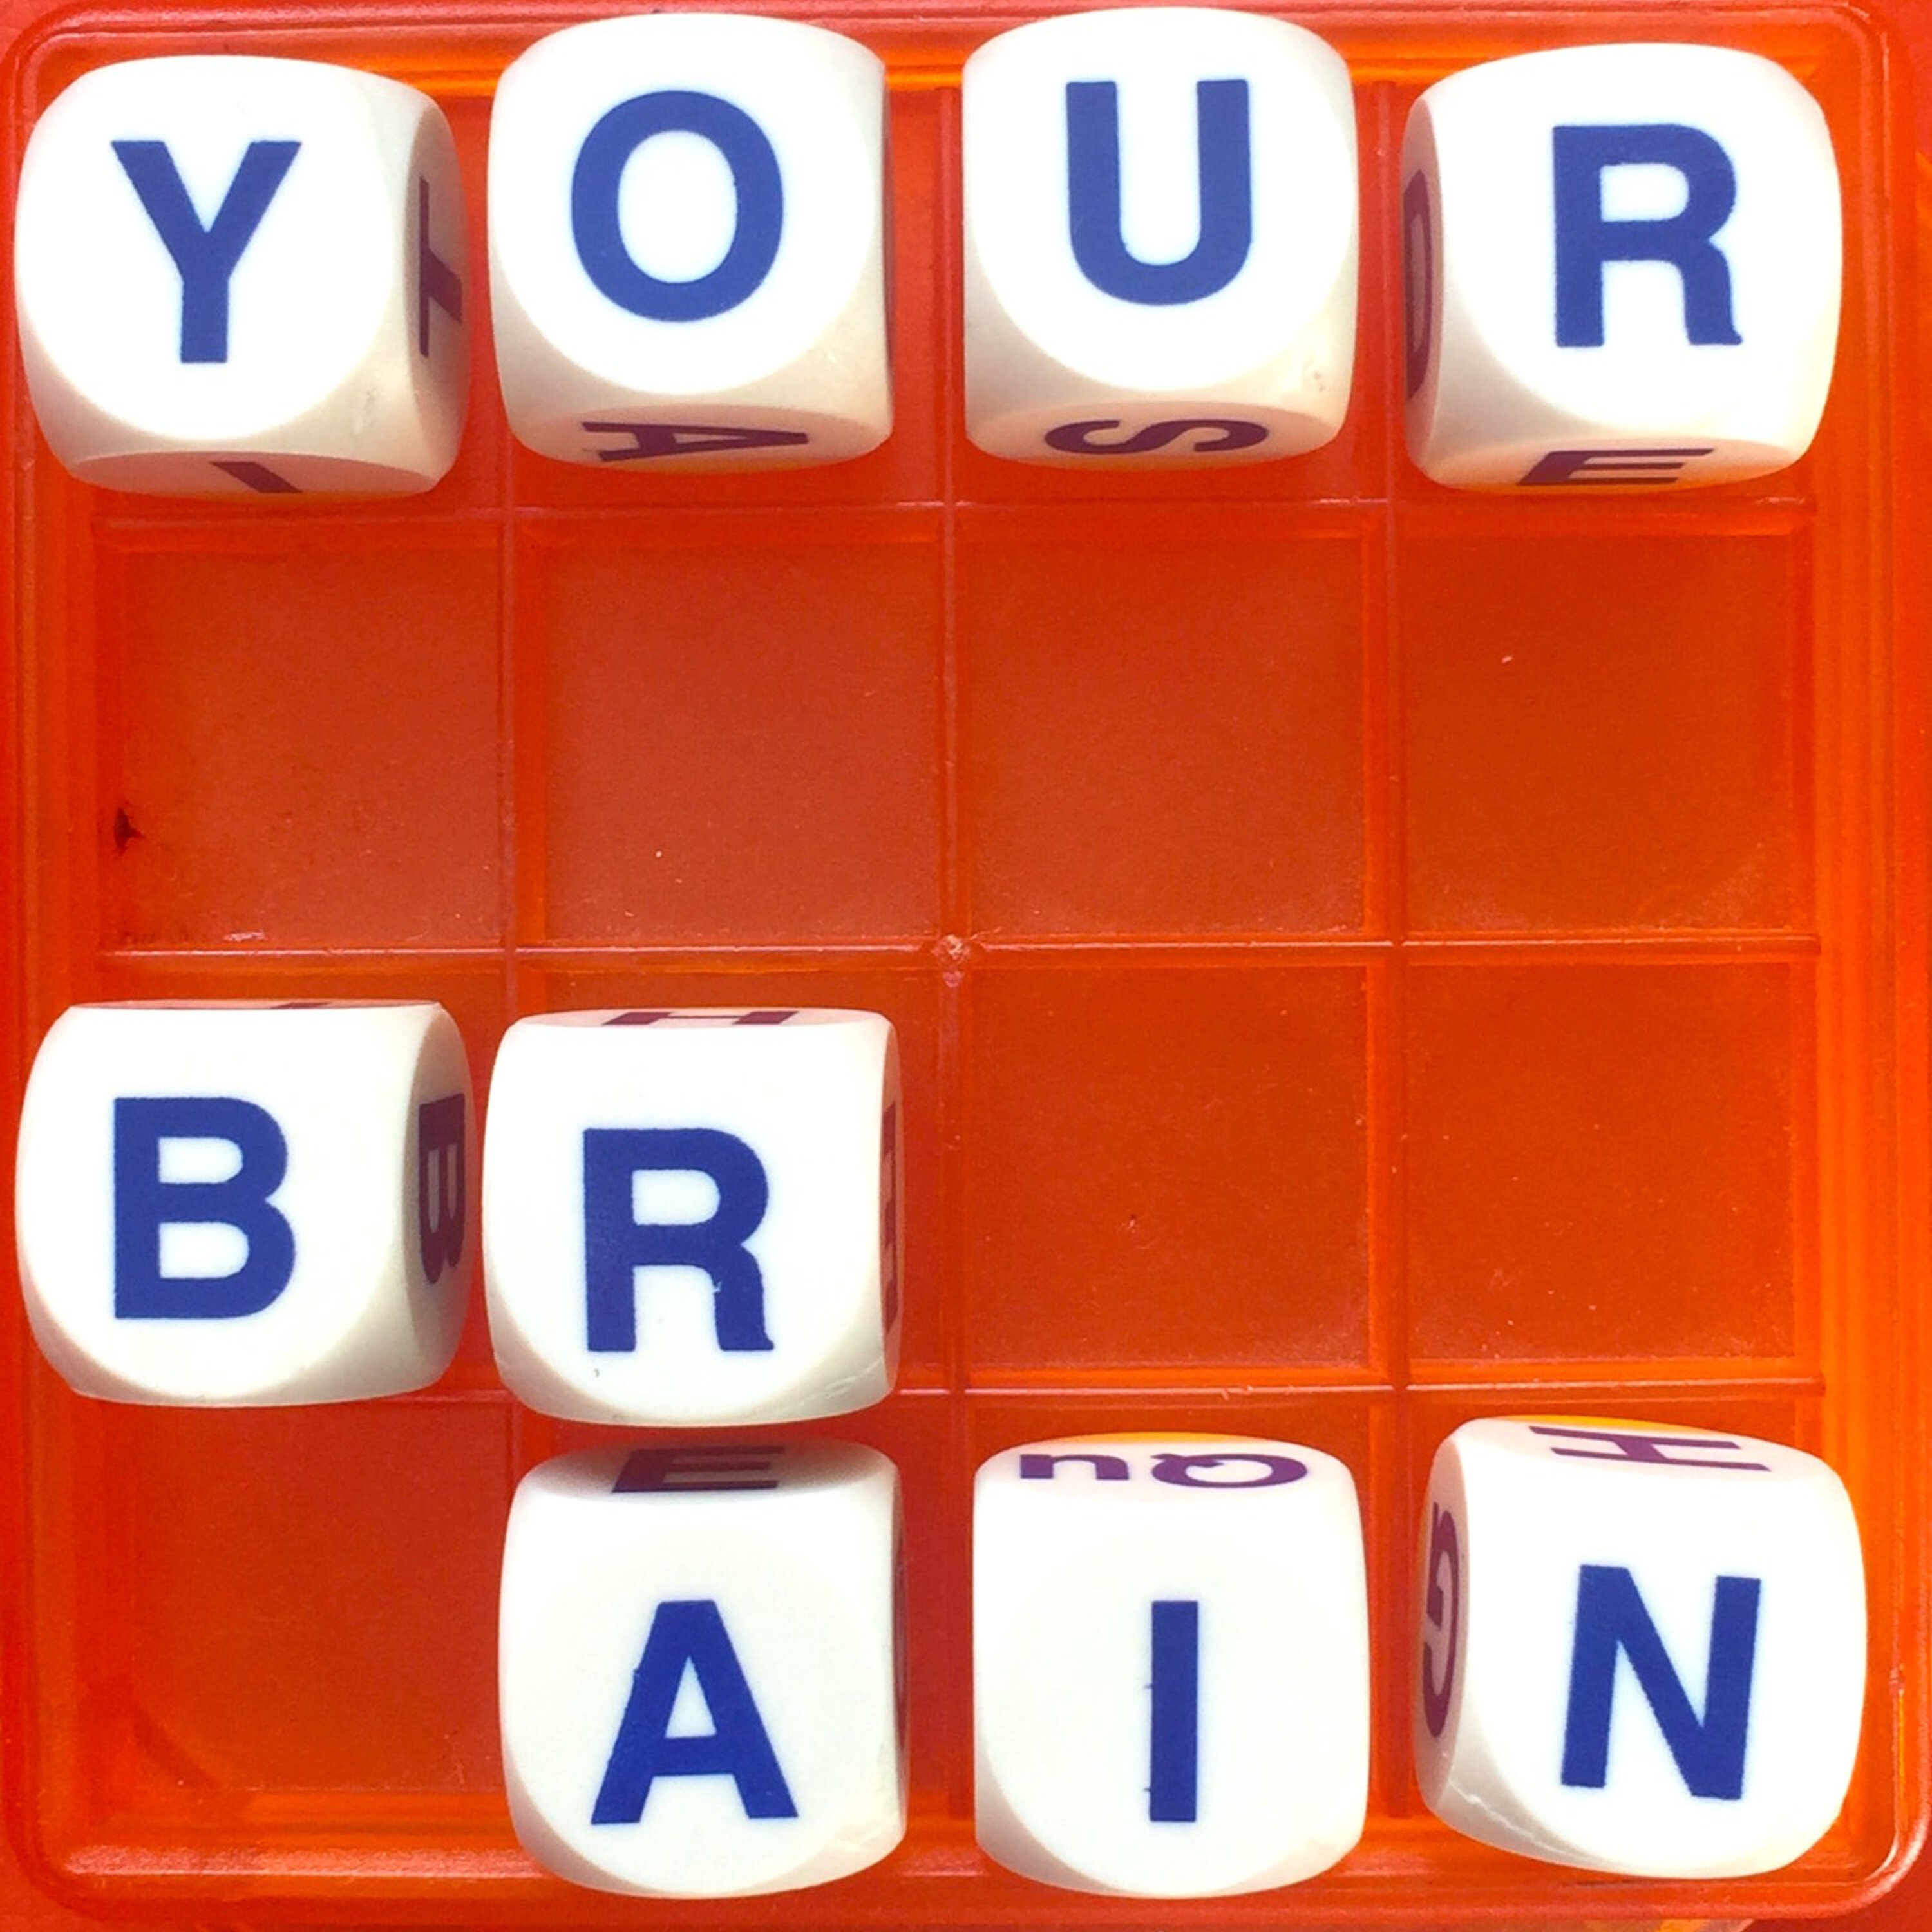 Thumbnail for "44: This Is Your Brain On Language".